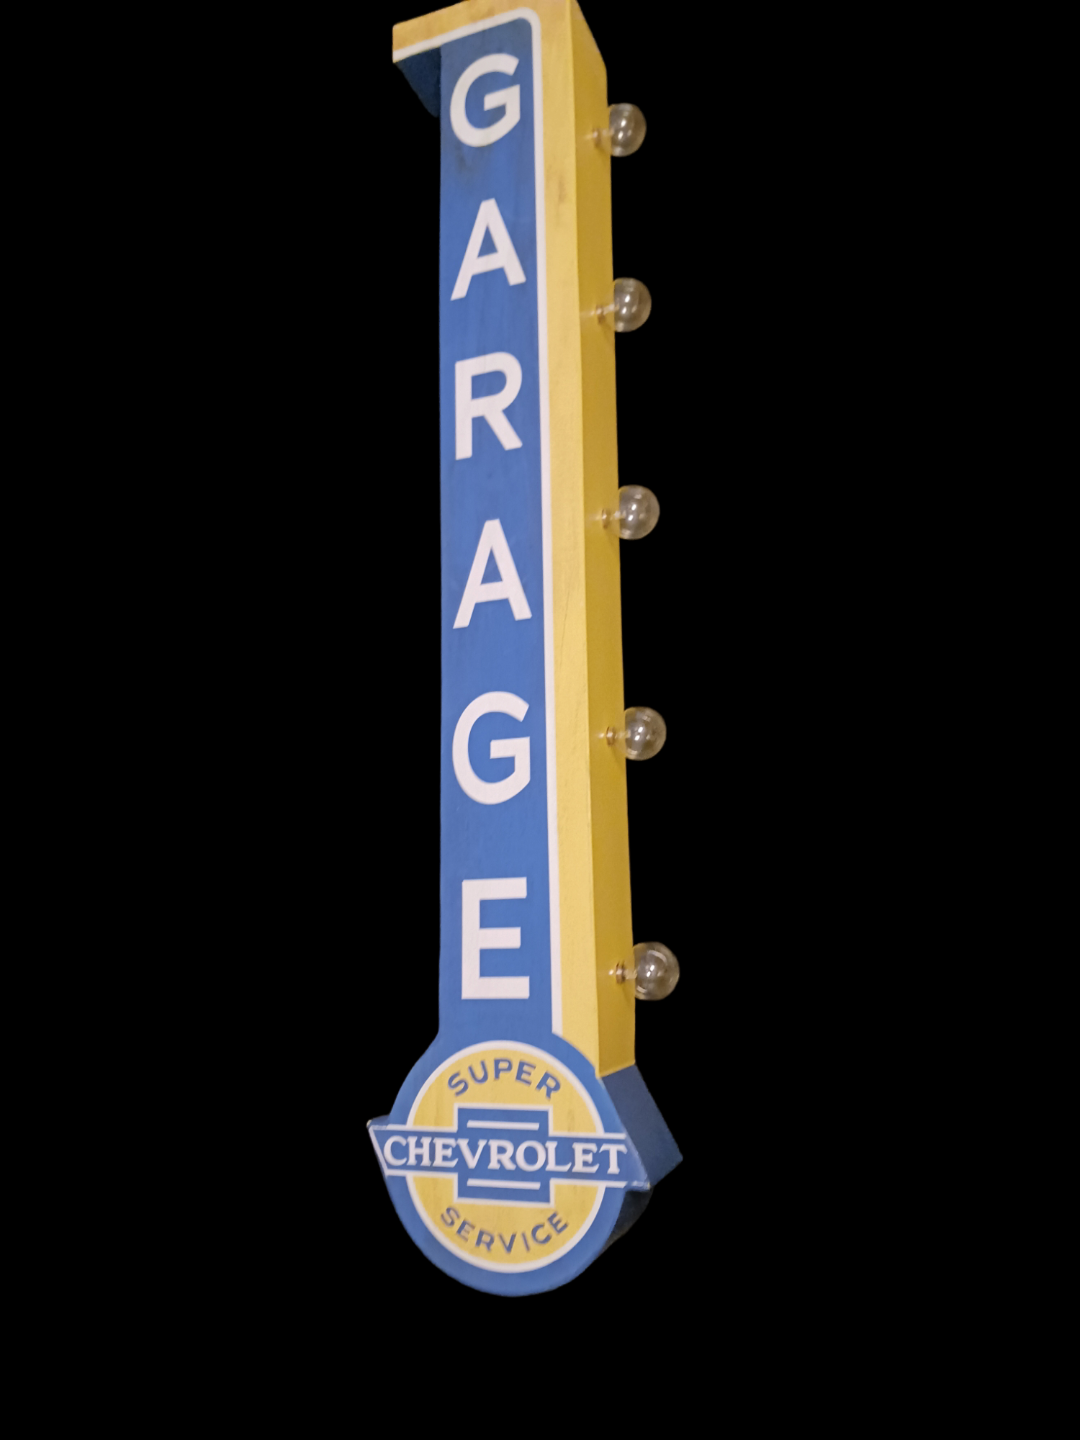 "Chevy Garage" marquee sign.